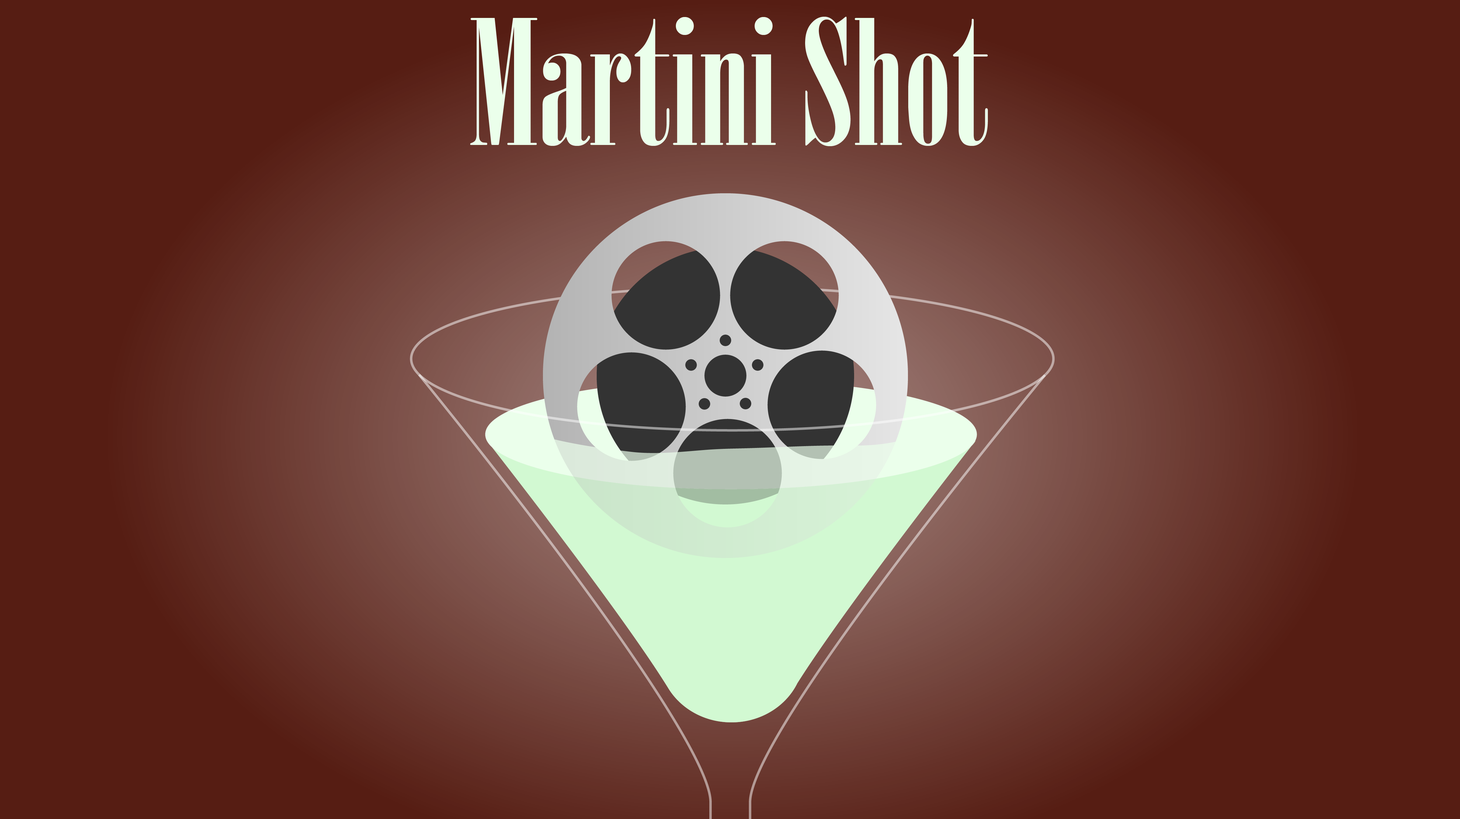 Rob demands Christmas presents, cheats at Secret Santa, and asks you for money in this holiday "Martini Shot."